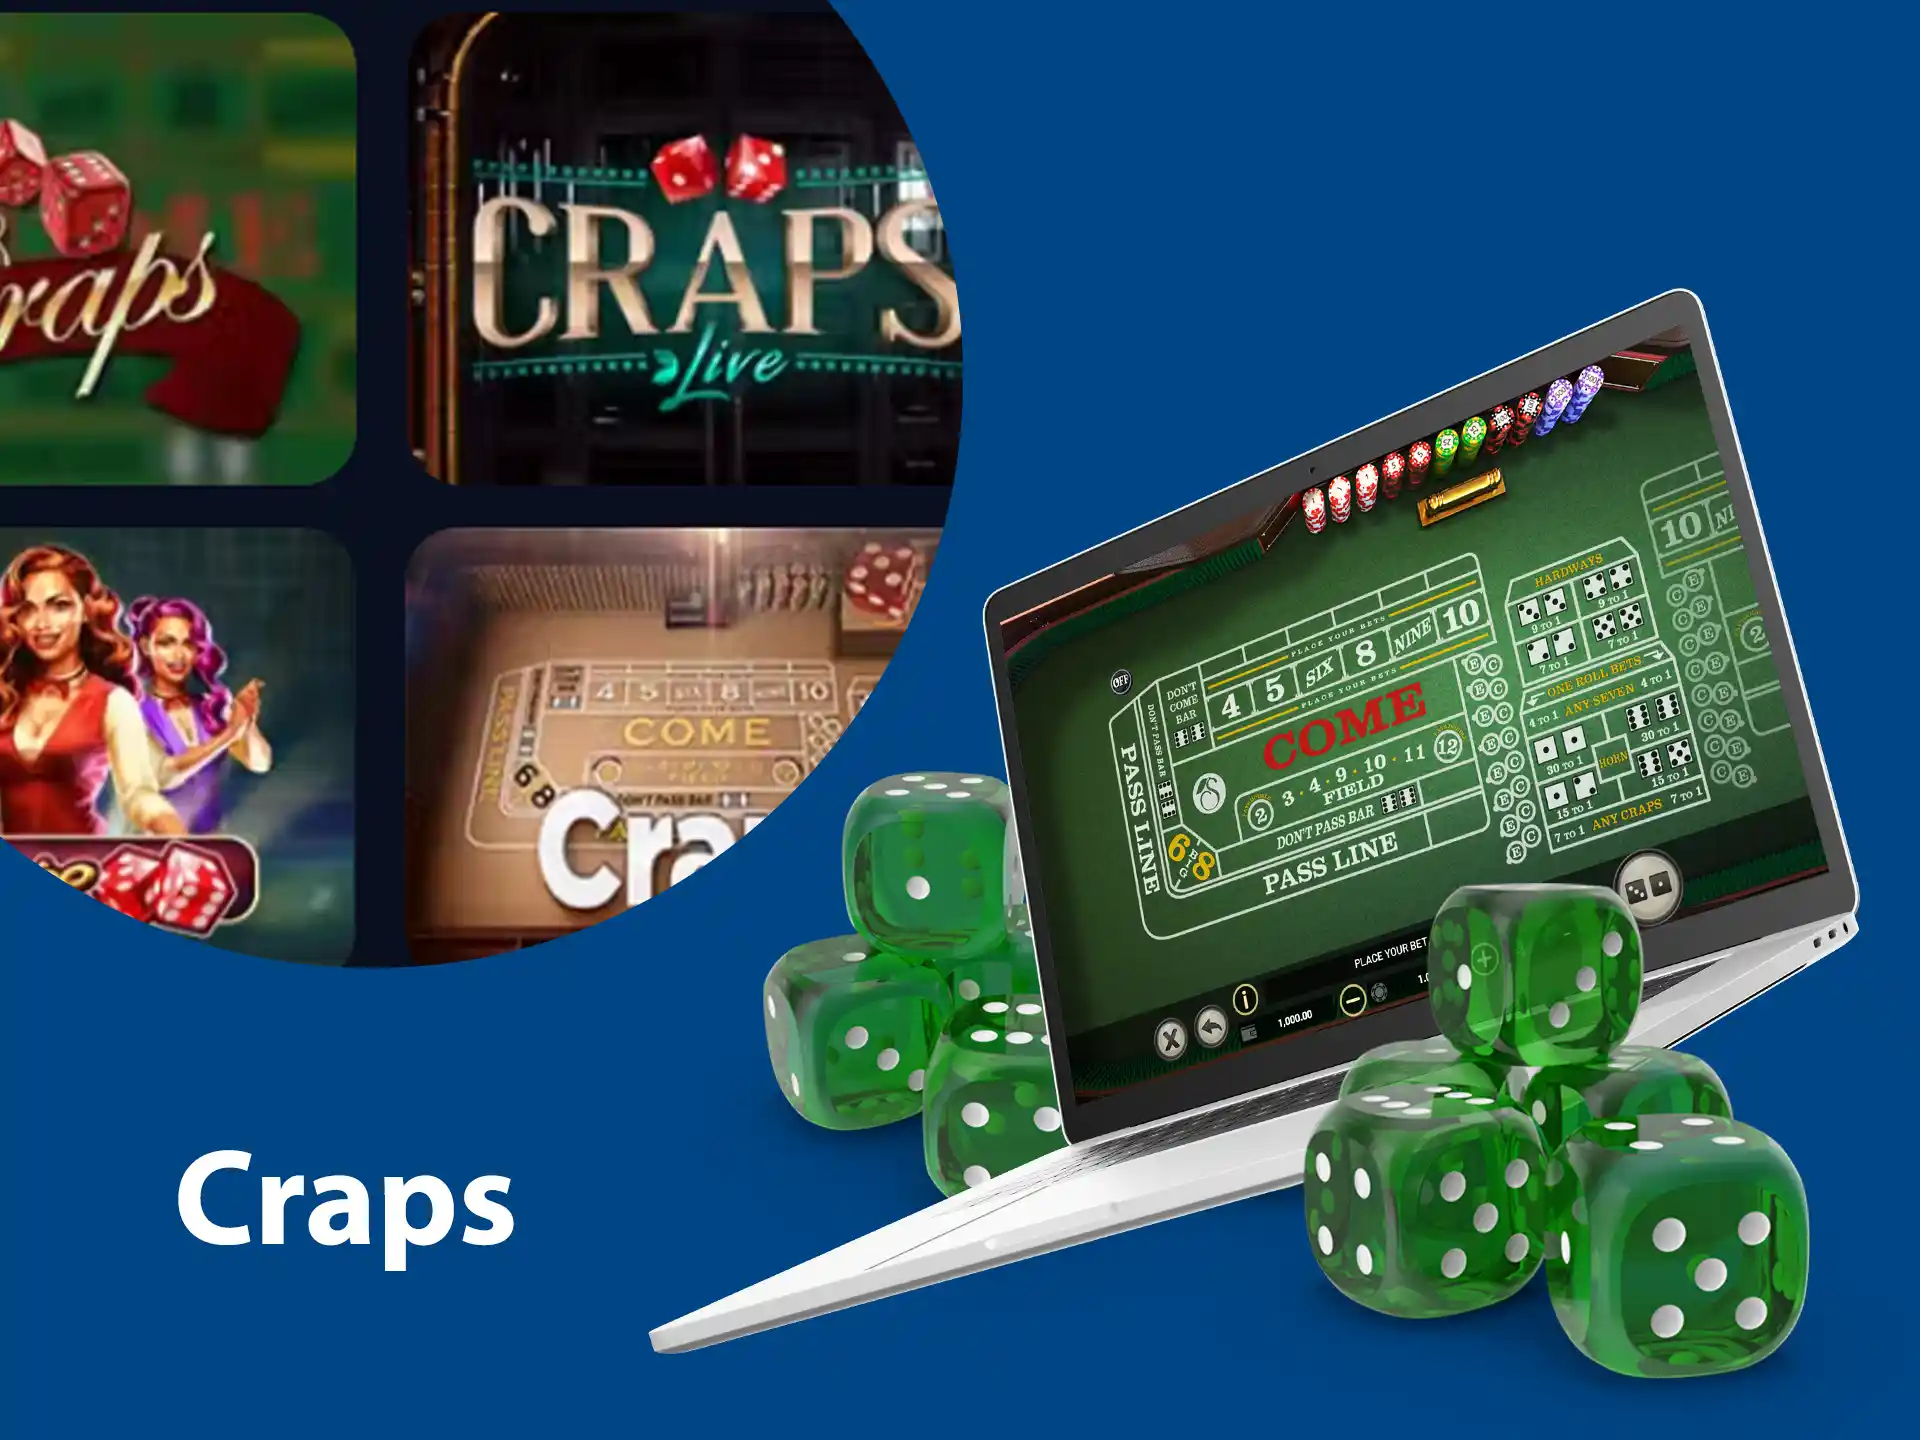 Craps dice game offers bets with favorable odds.